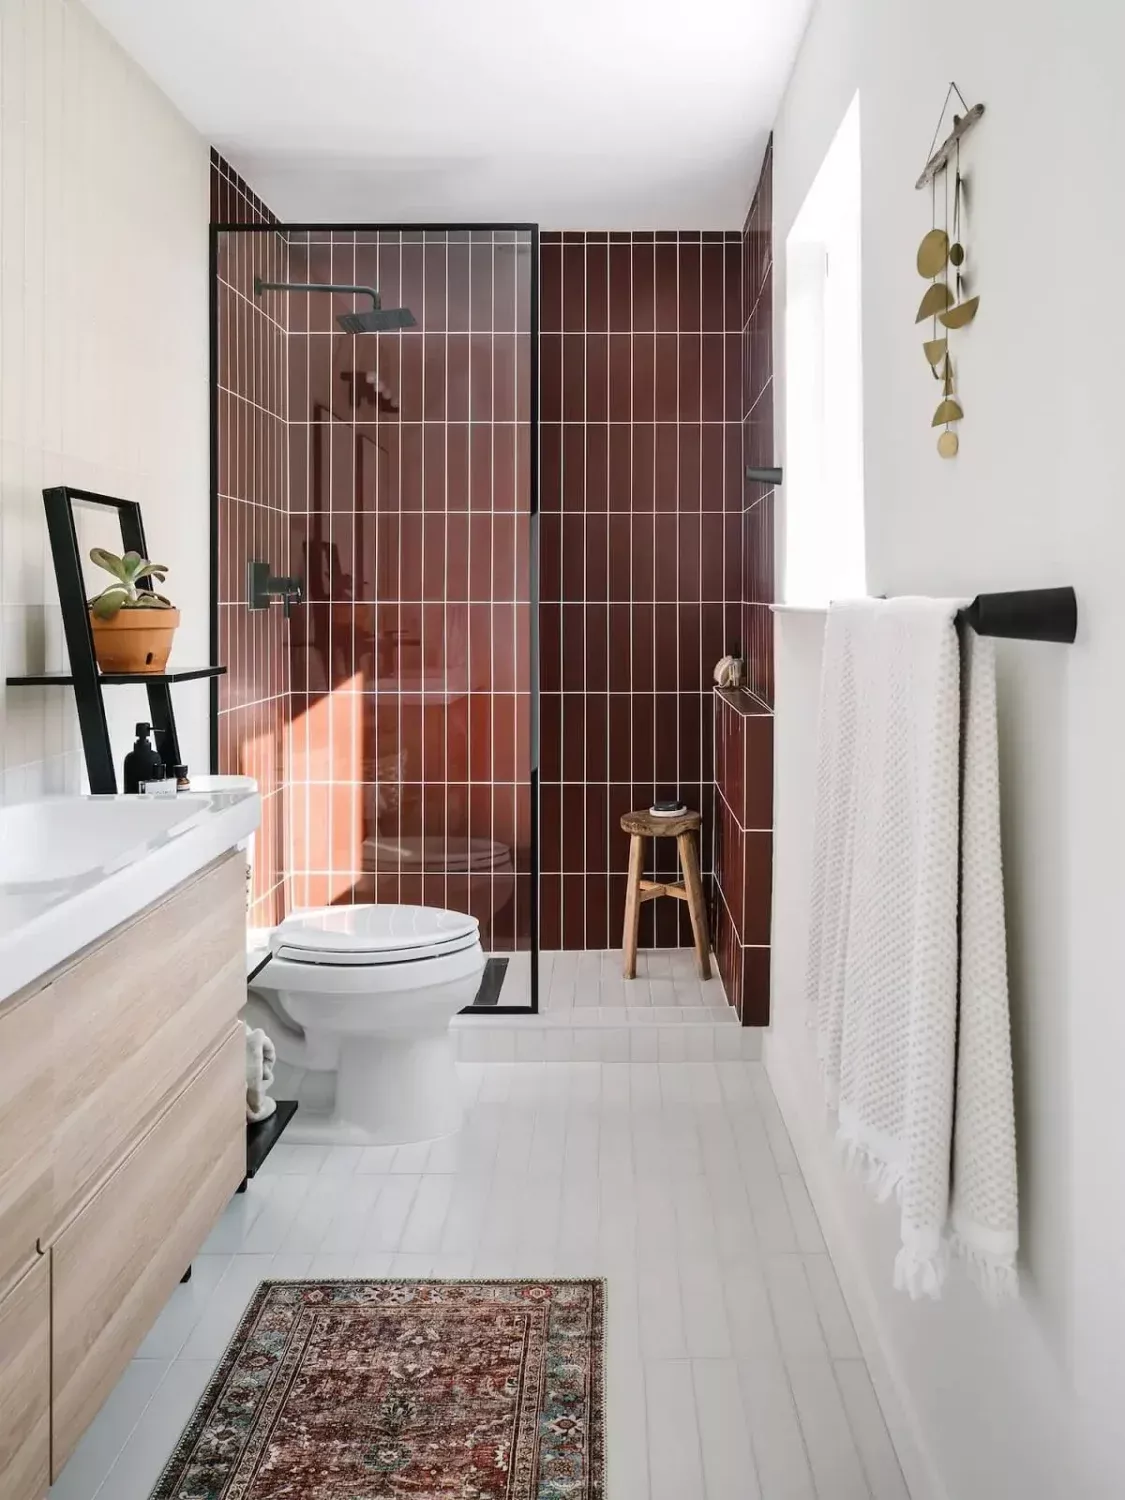 Bathroom Tiles Design: Elevating Your Bath Space with Artful Flooring Solutions